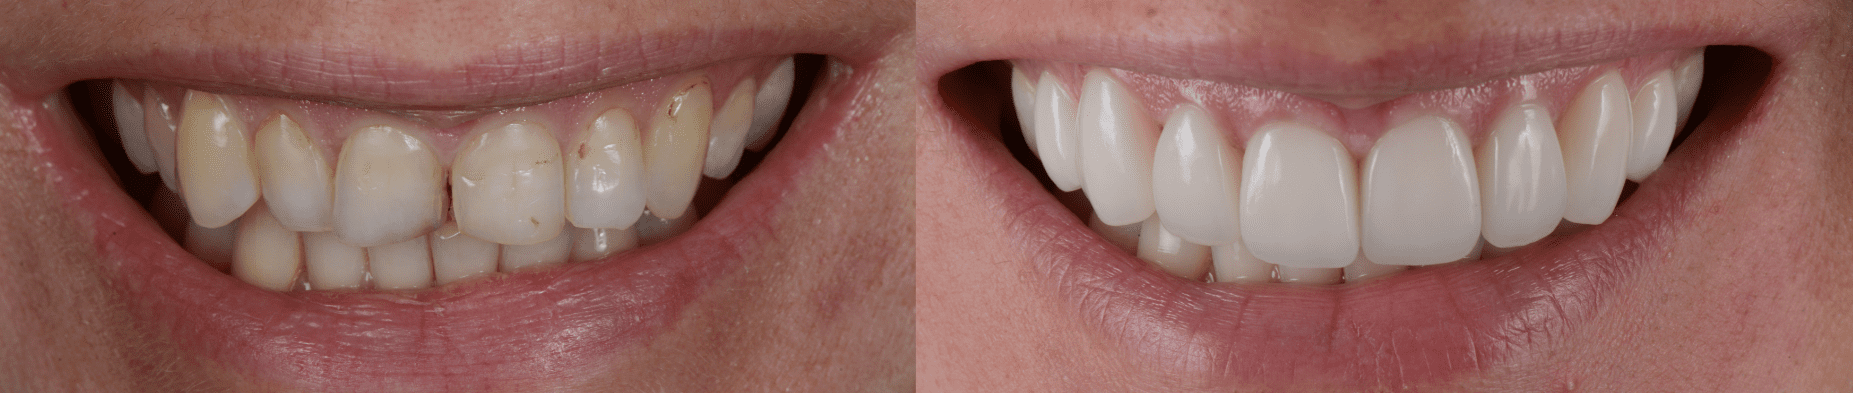 porcelain veneers before and after 1